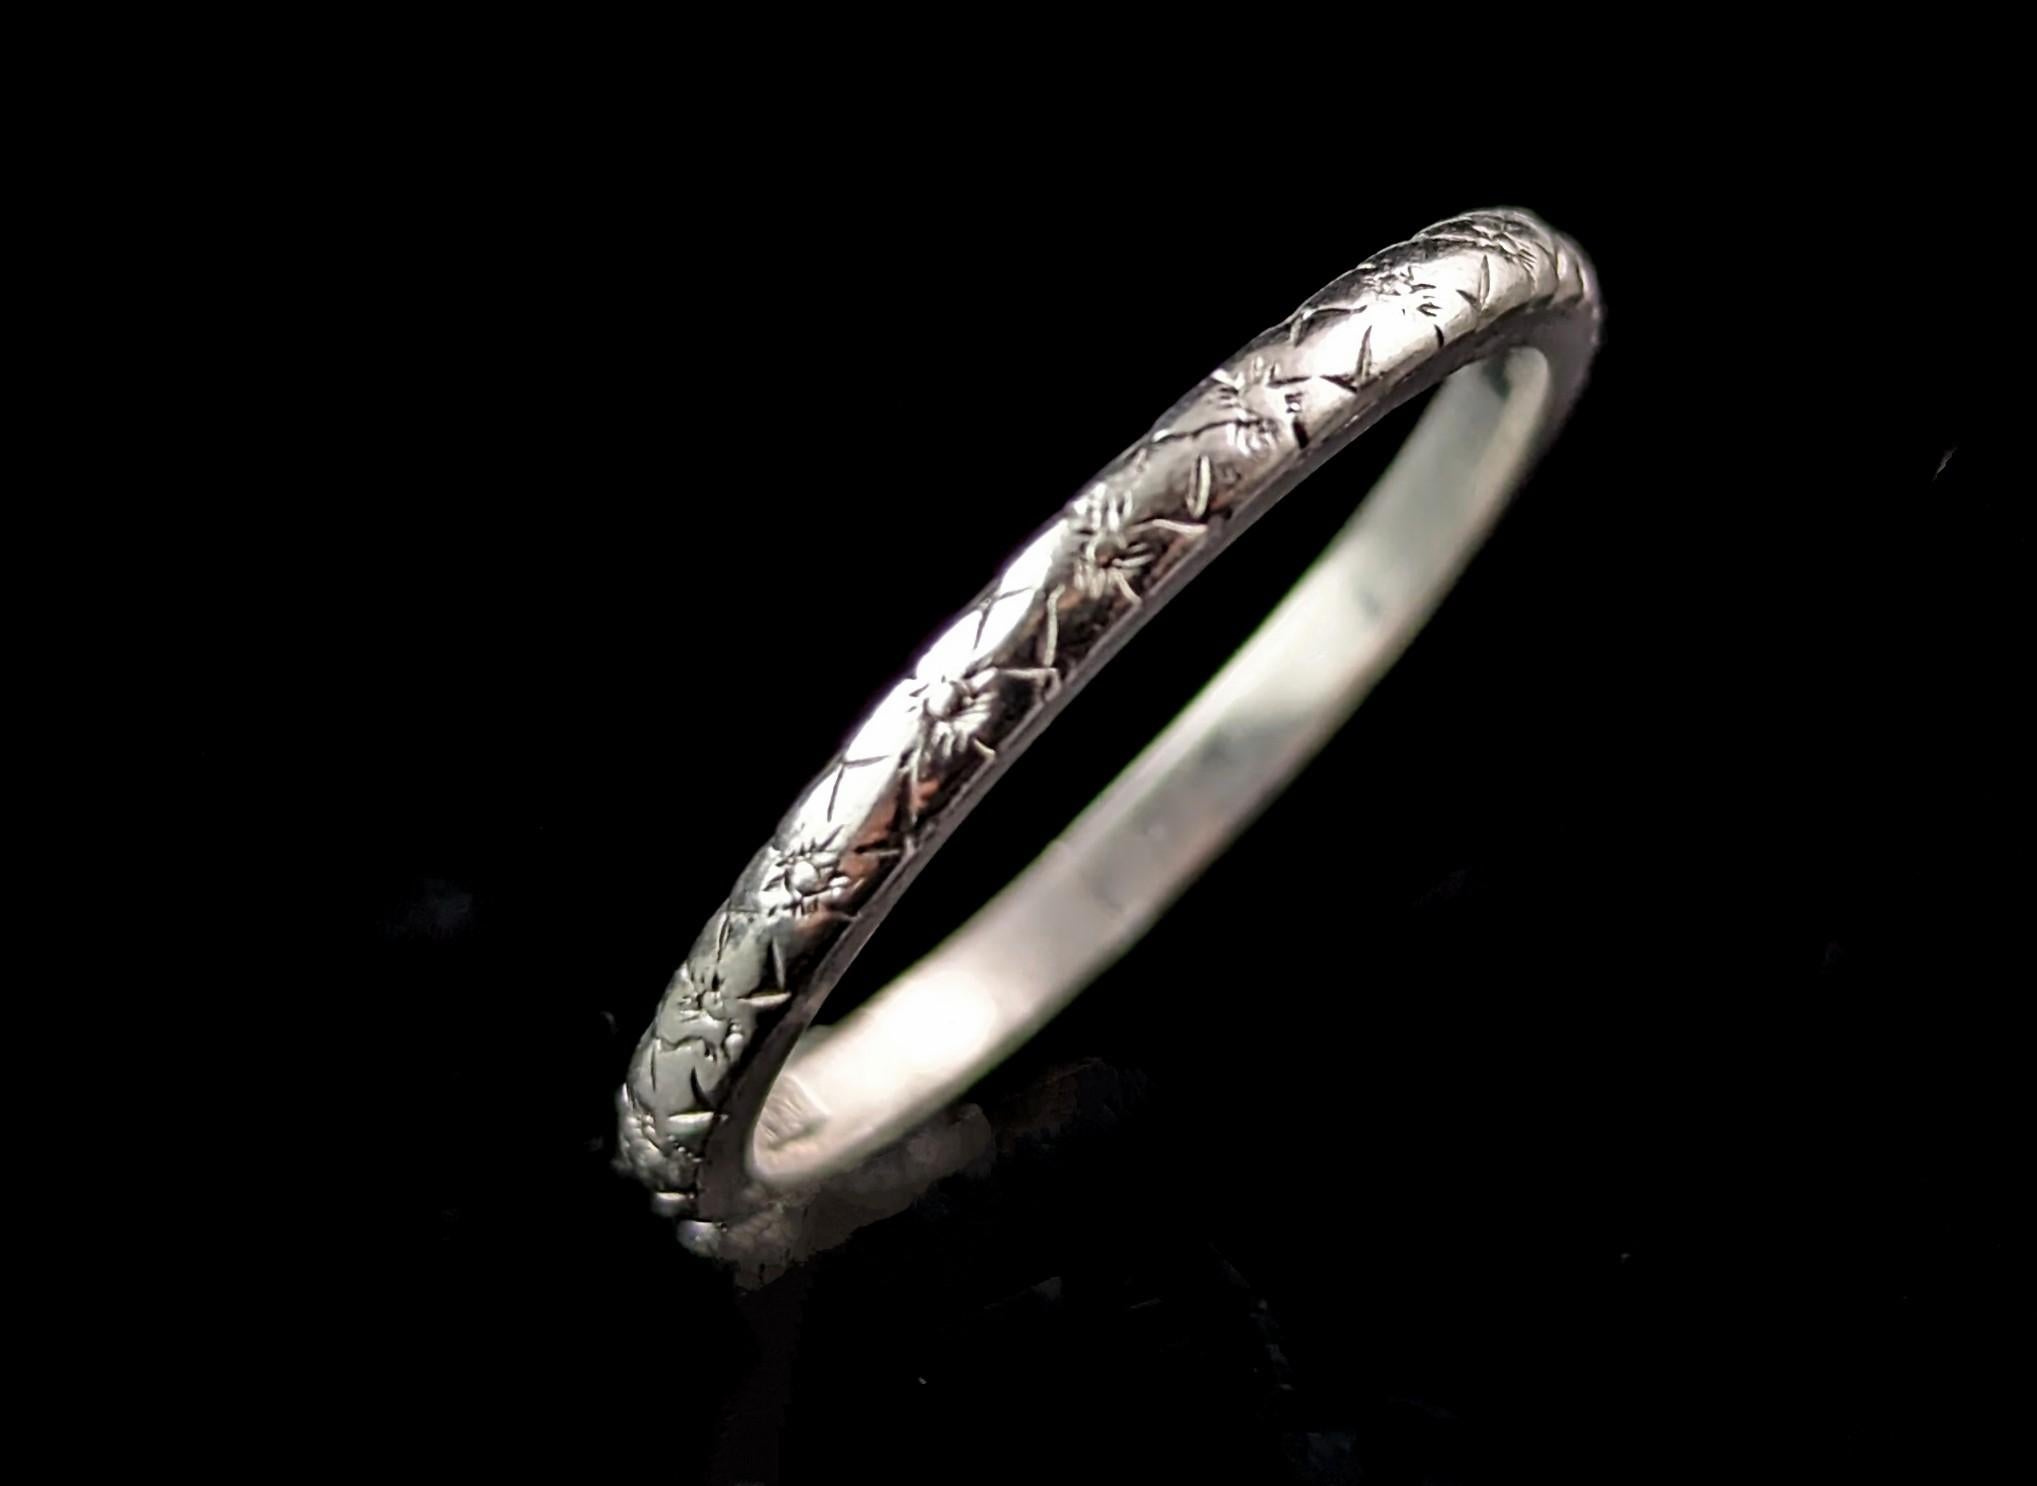 A pretty vintage Art Deco era platinum wedding band.

It is a dainty band with a pretty orange blossom engraved pattern all around the outer of the band.

It has a soft D profile and despite its dainty size it has a good weight to it.

These were